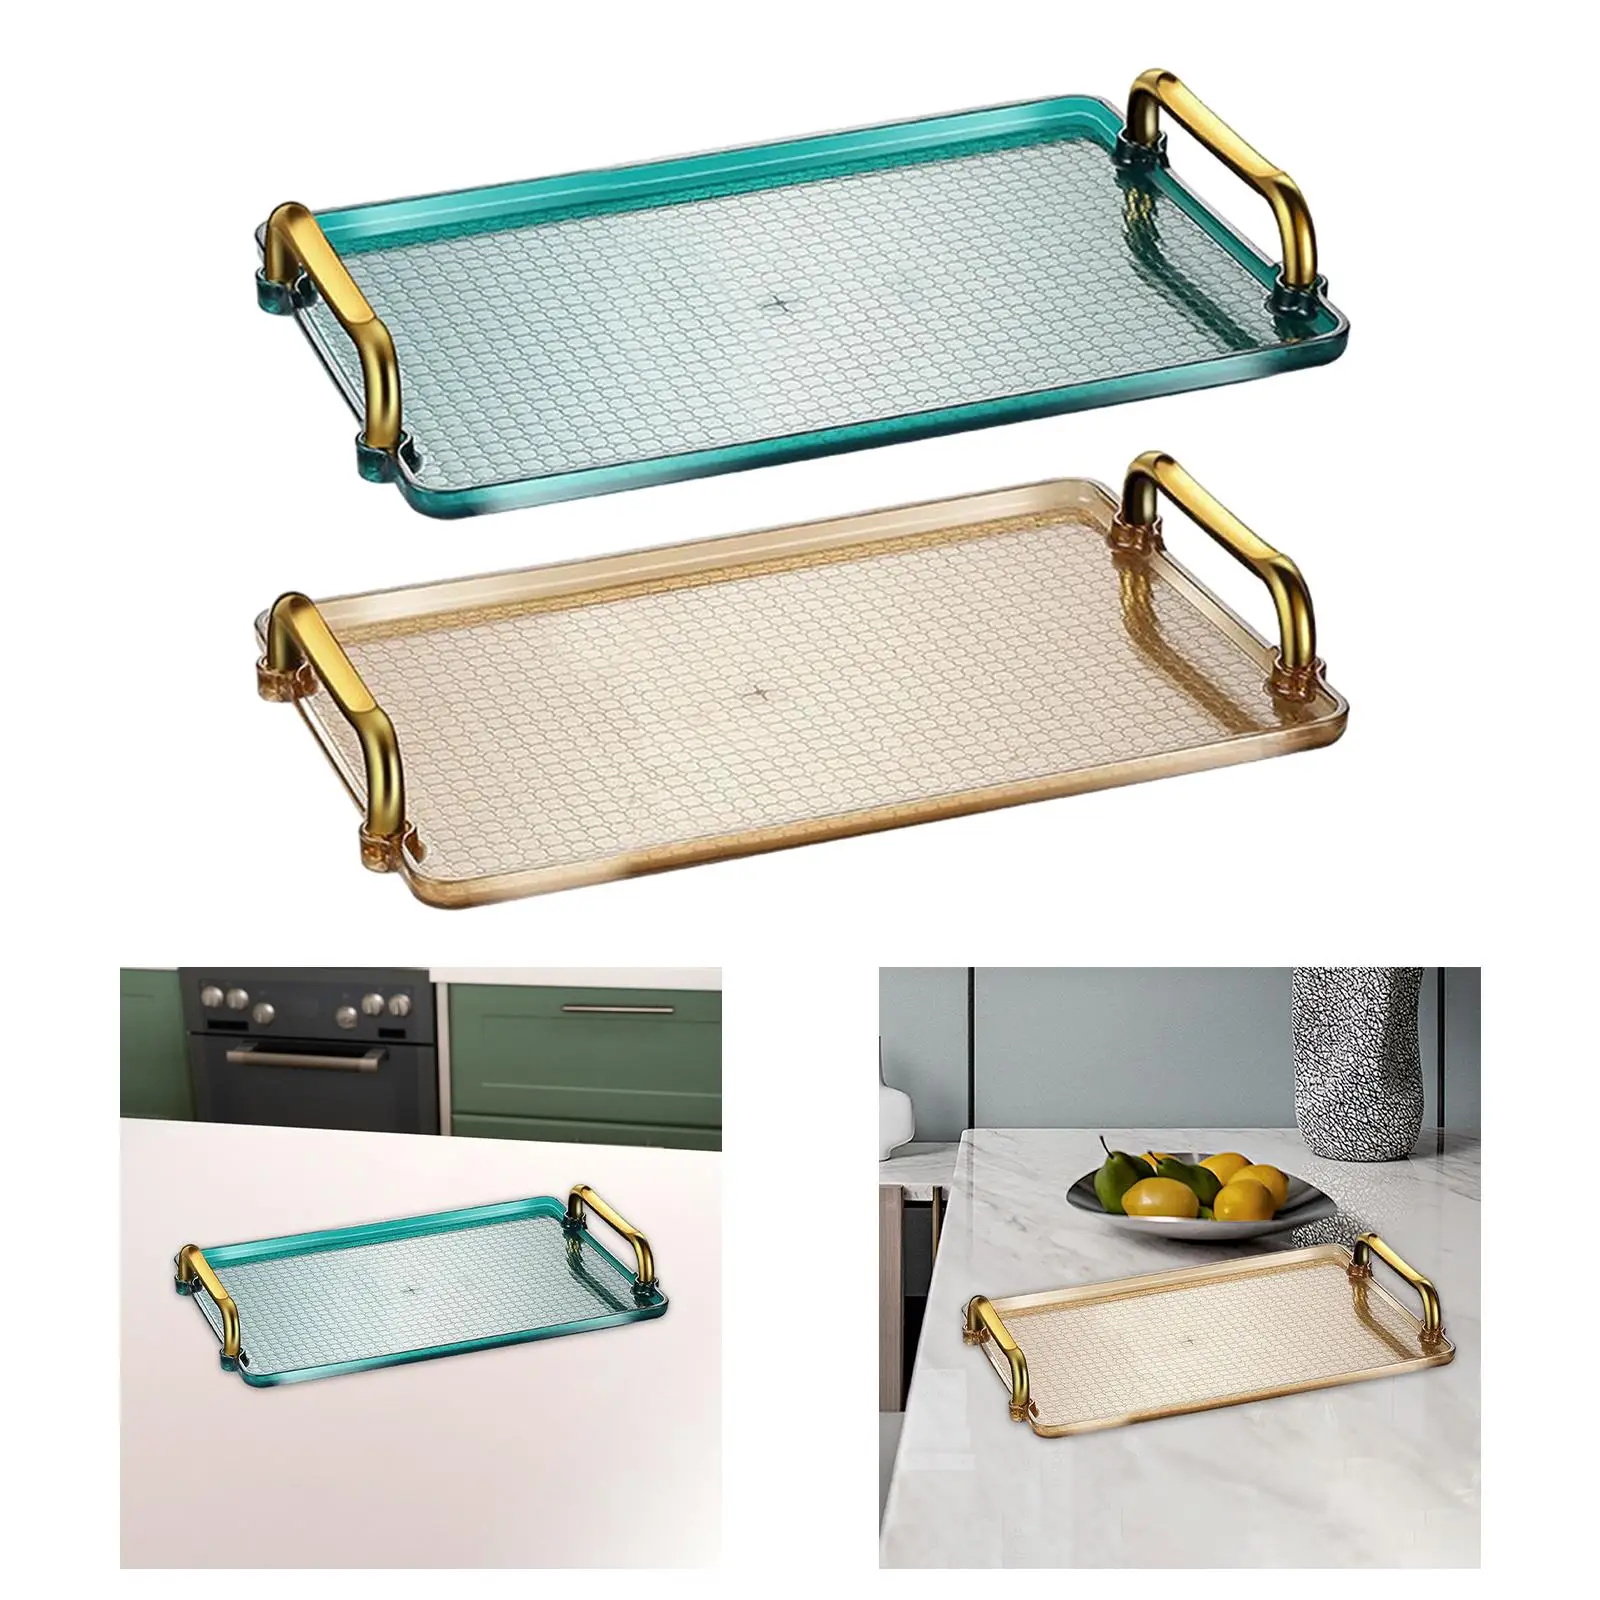 Serving Platter Versatile Convenient for Dinner Patio Housewarming Gift Table Organizer Cosmetic Storage Decorative Tray